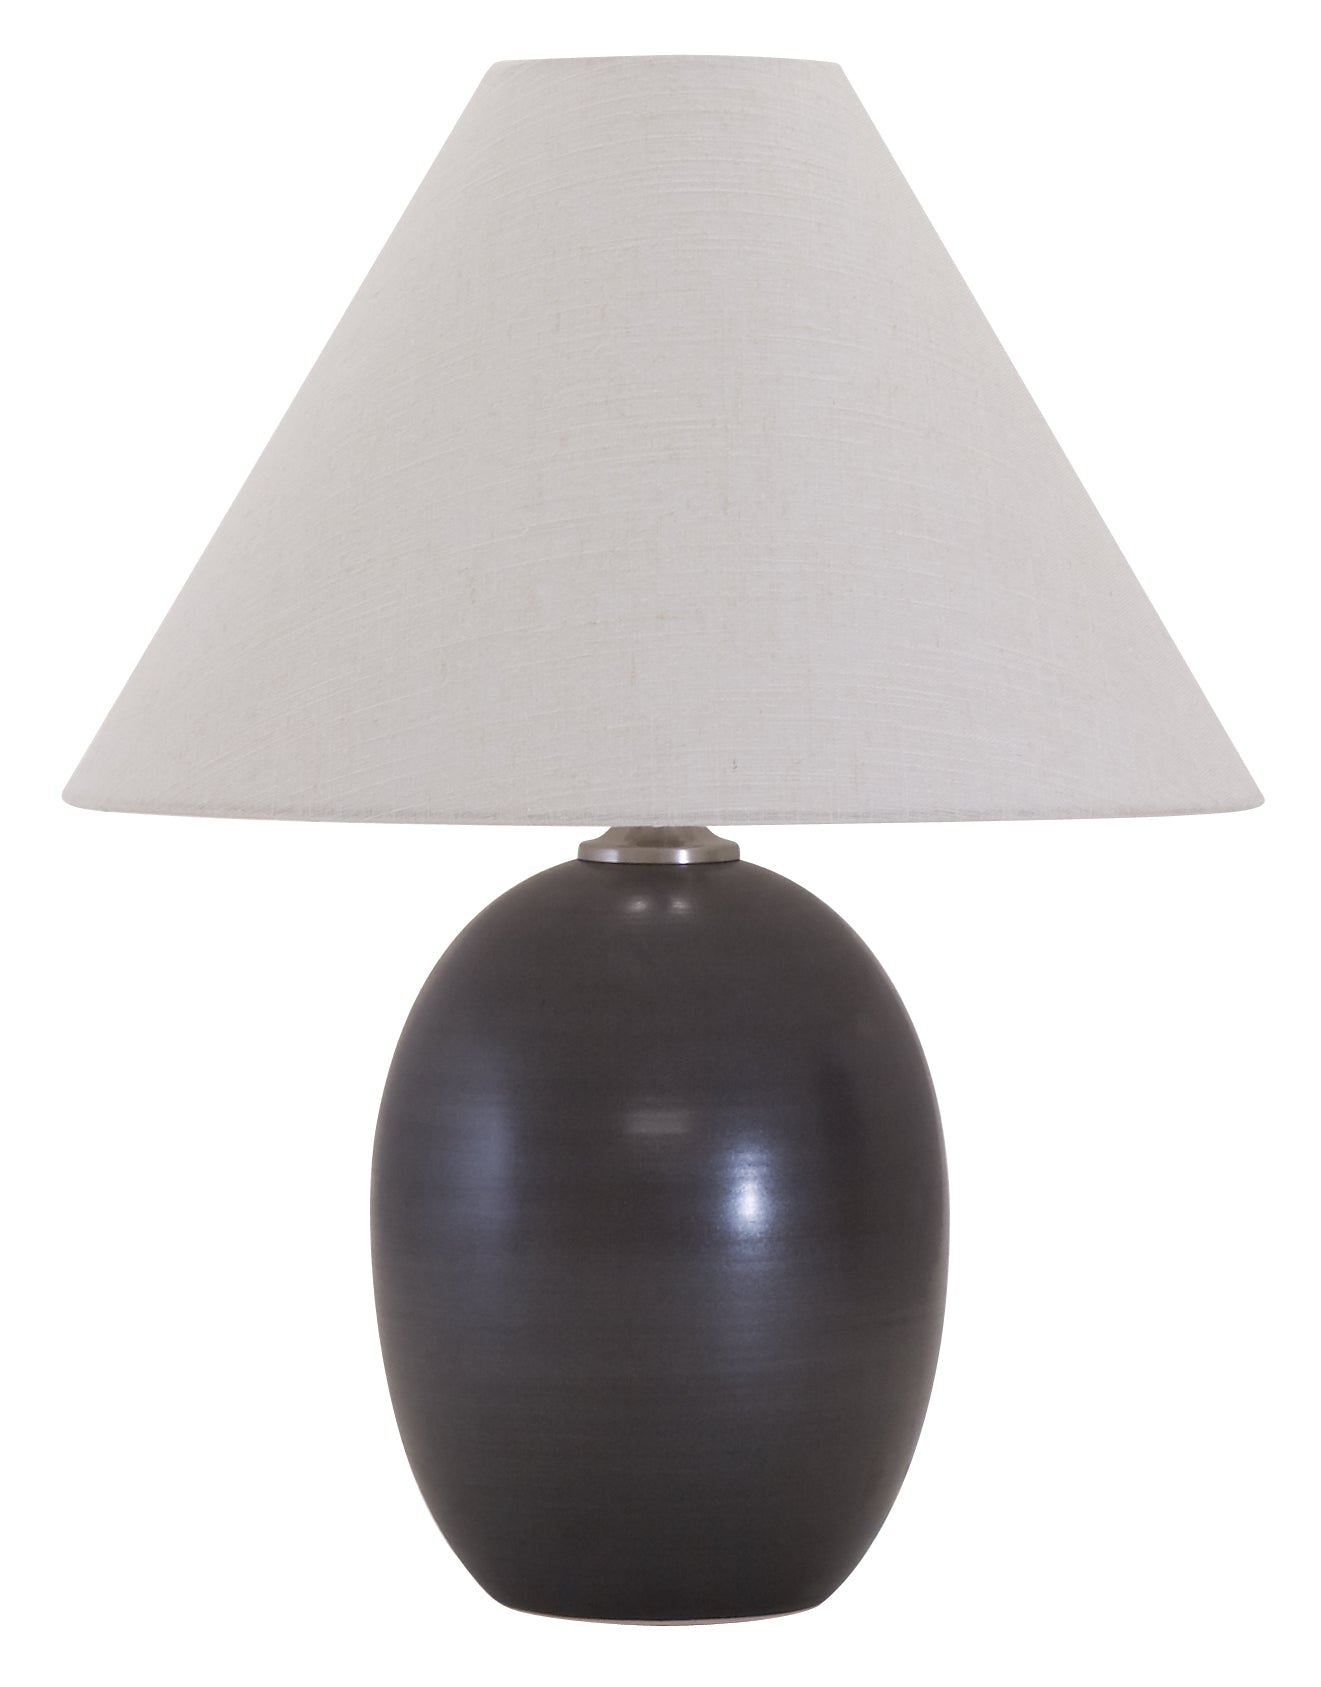 House of Troy Scatchard 22.5" Stoneware Table Lamp in Black Matte GS140-BM